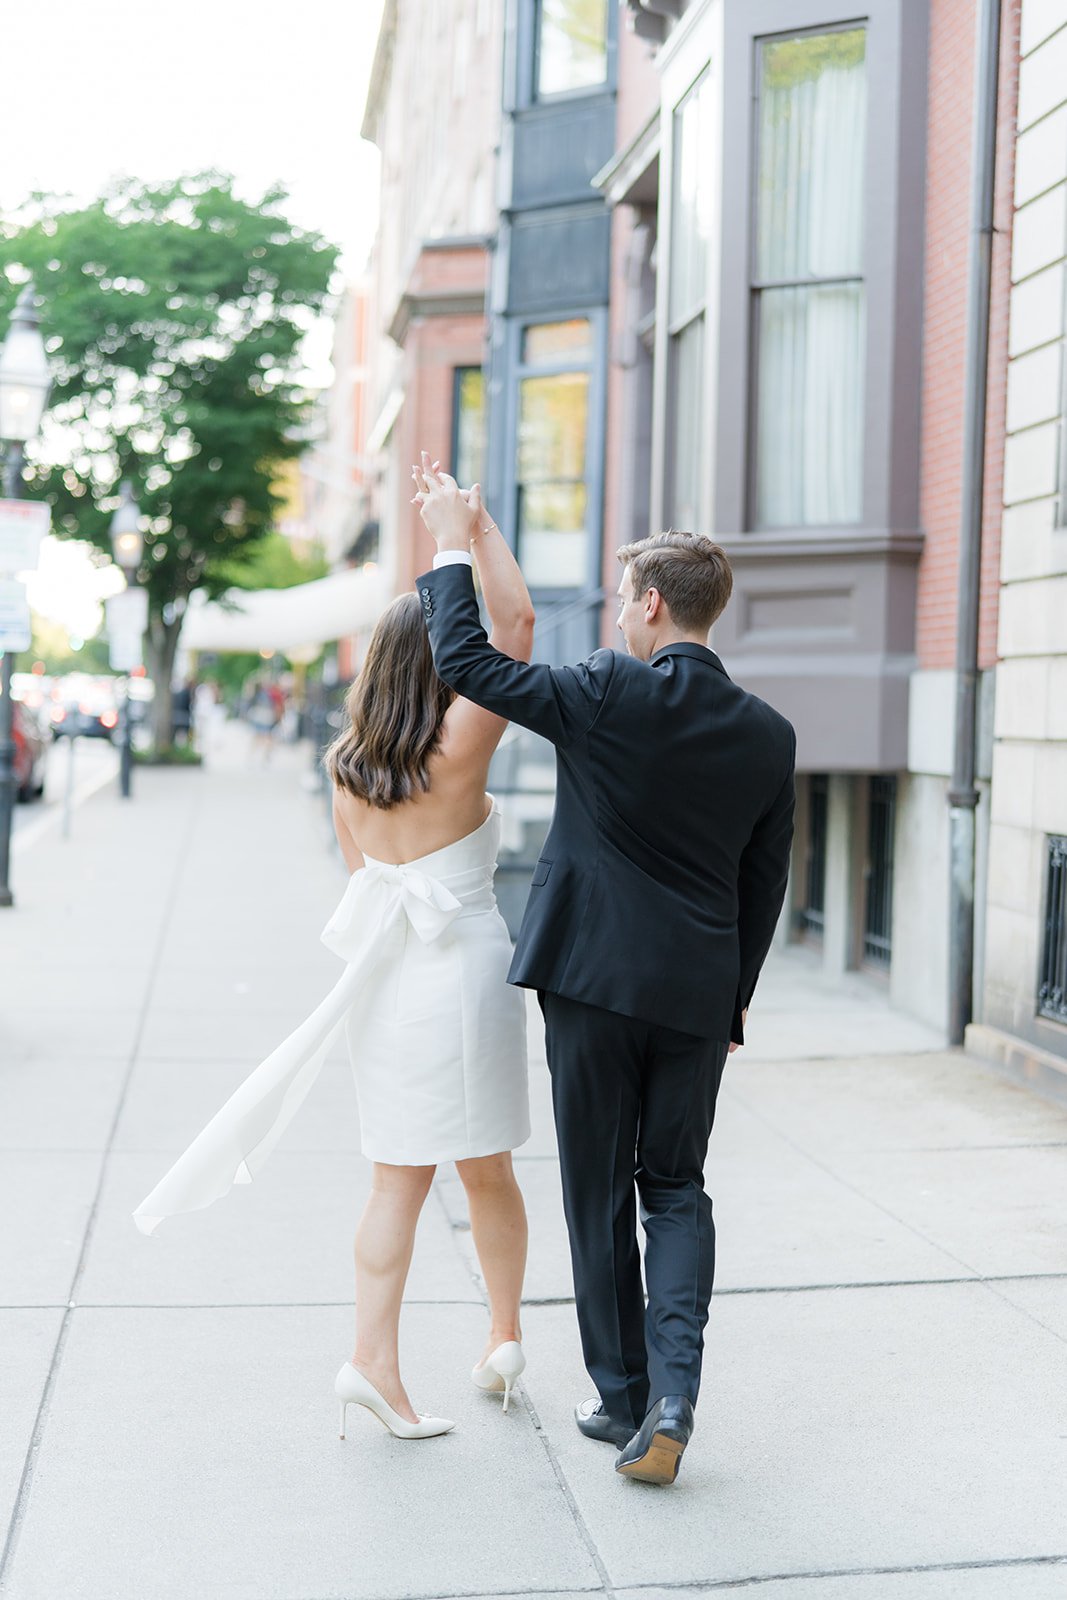 Walking on the sidewalk in Beacon Hill. Groom twirls his bride to be with her bow flowing in the wind. Summer wedding in boston.